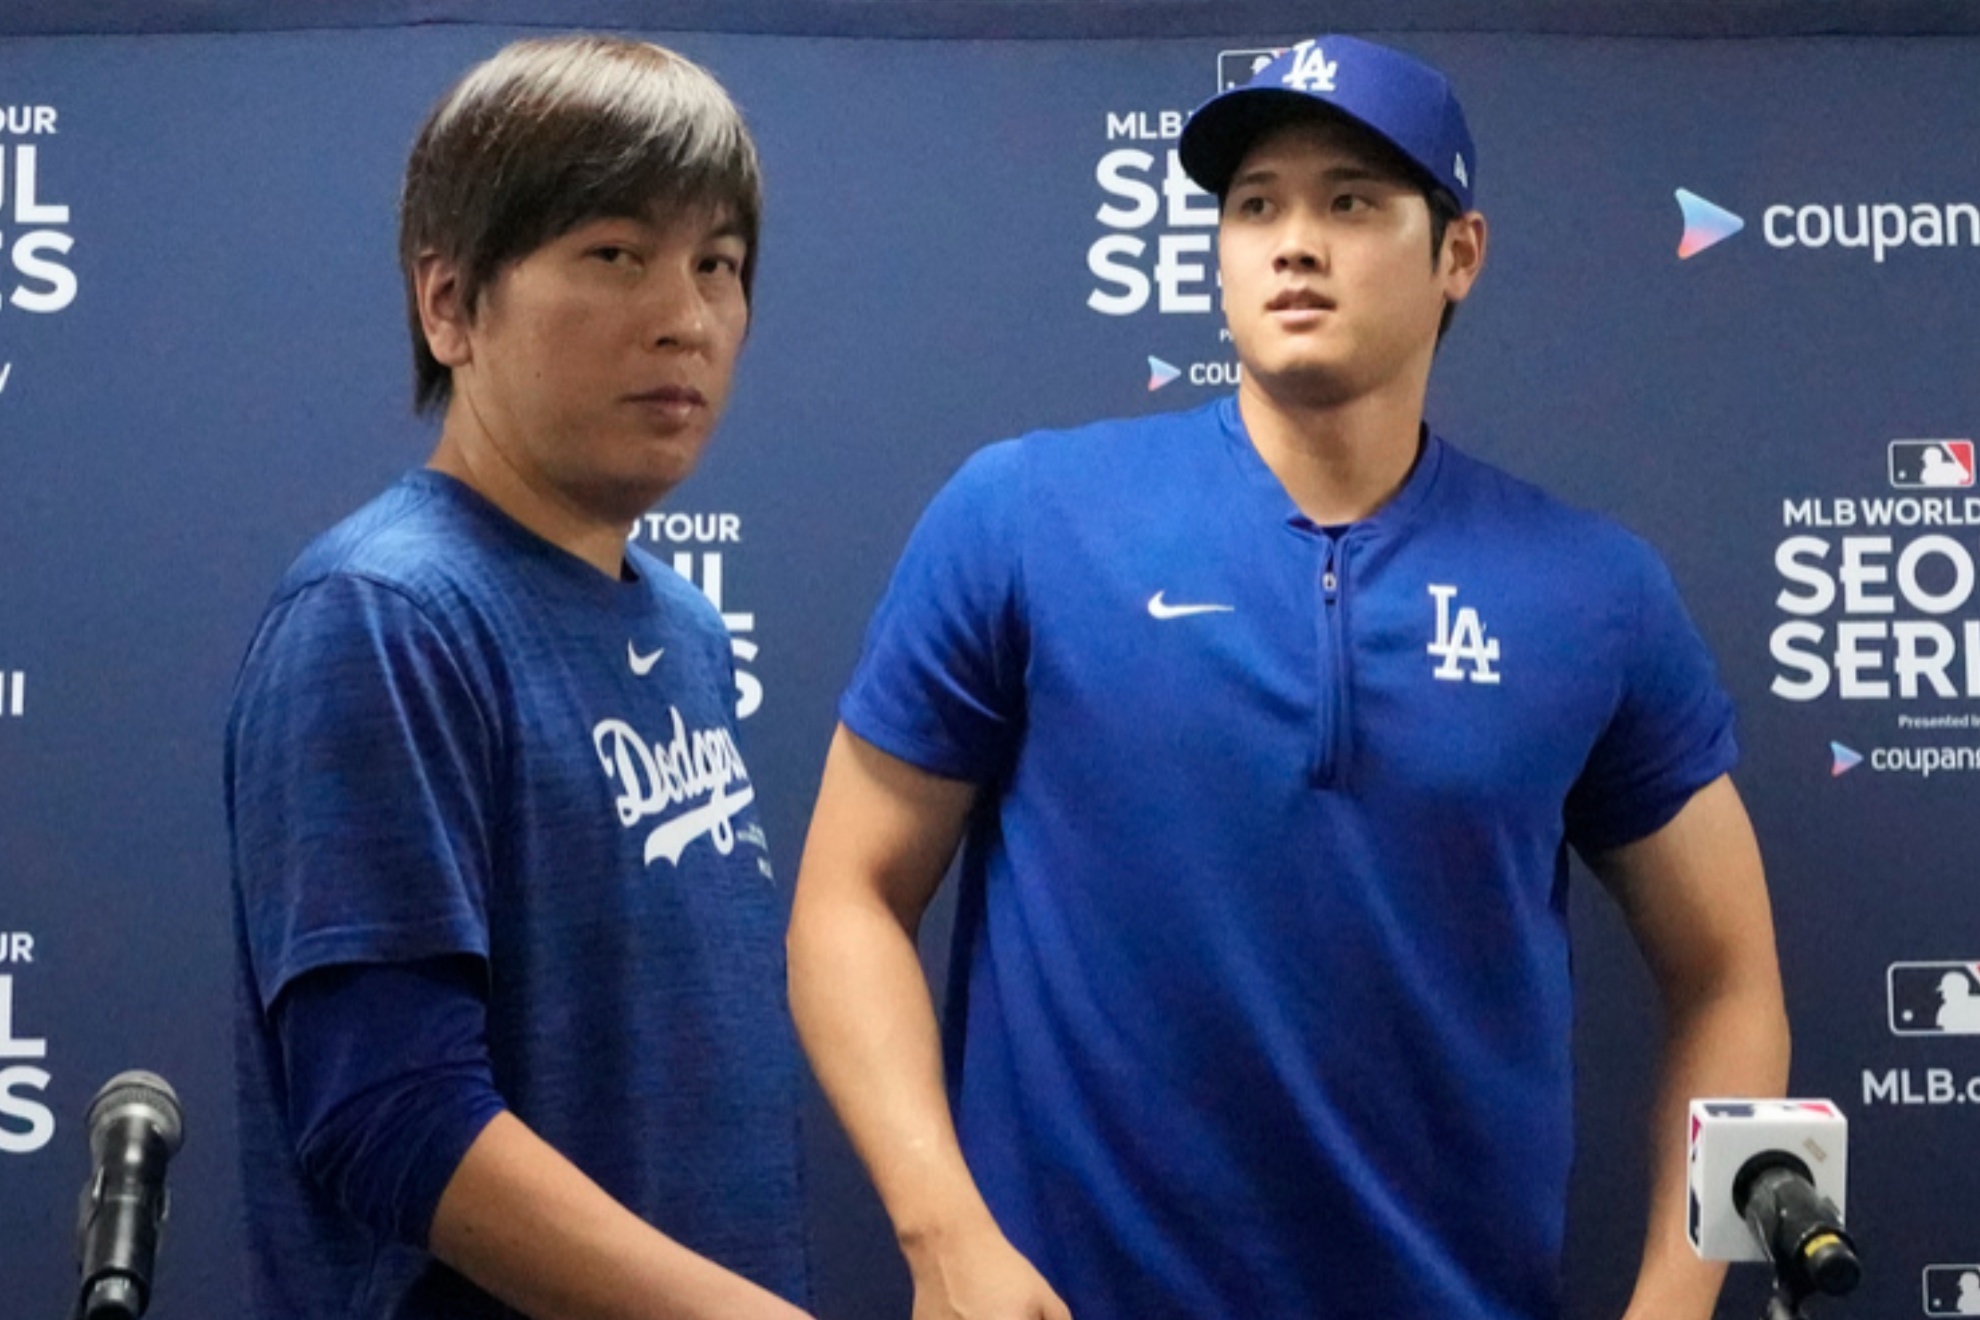 Ippei Mizuhara was fired by the Dodgers for allegedly stealing millions of dollars from Shohei Ohtani